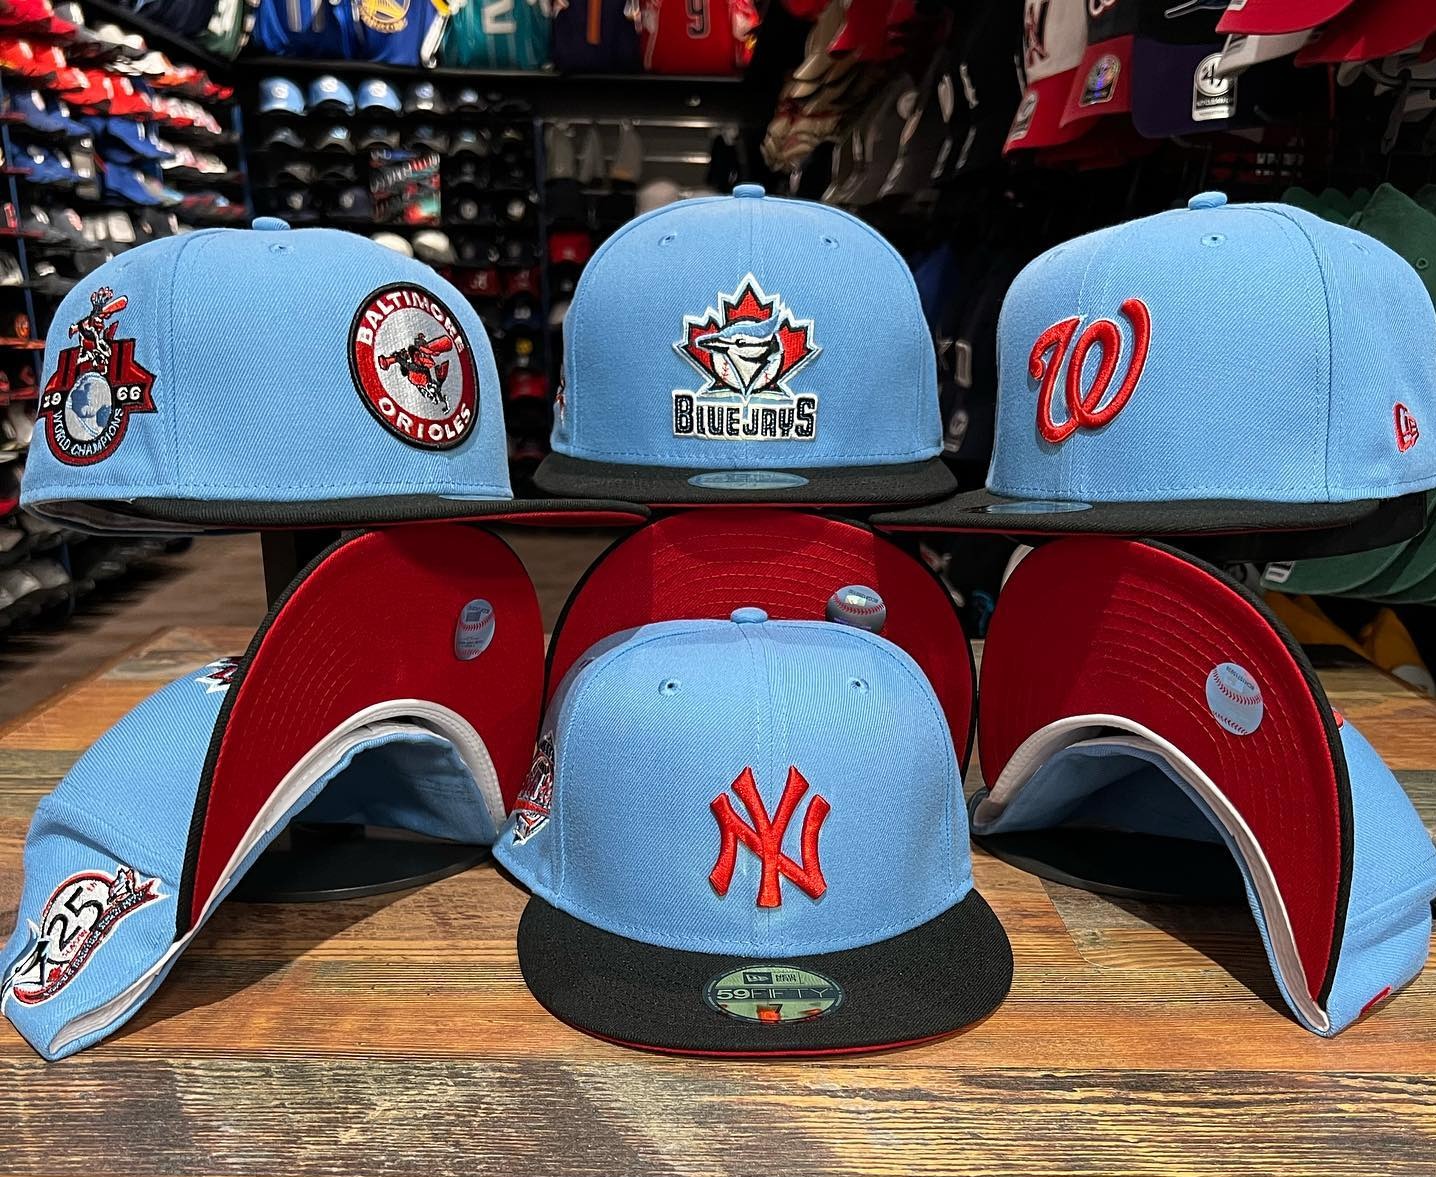 Lids on X: Big Papa has joined the #LidsExclusive New Era x MLB Ultimate  Patch: Undervisor family 🧢❤️ In select stores (teams vary by location).  #LidsLoyal 📸 / Instagram / lidstysonscorner  /